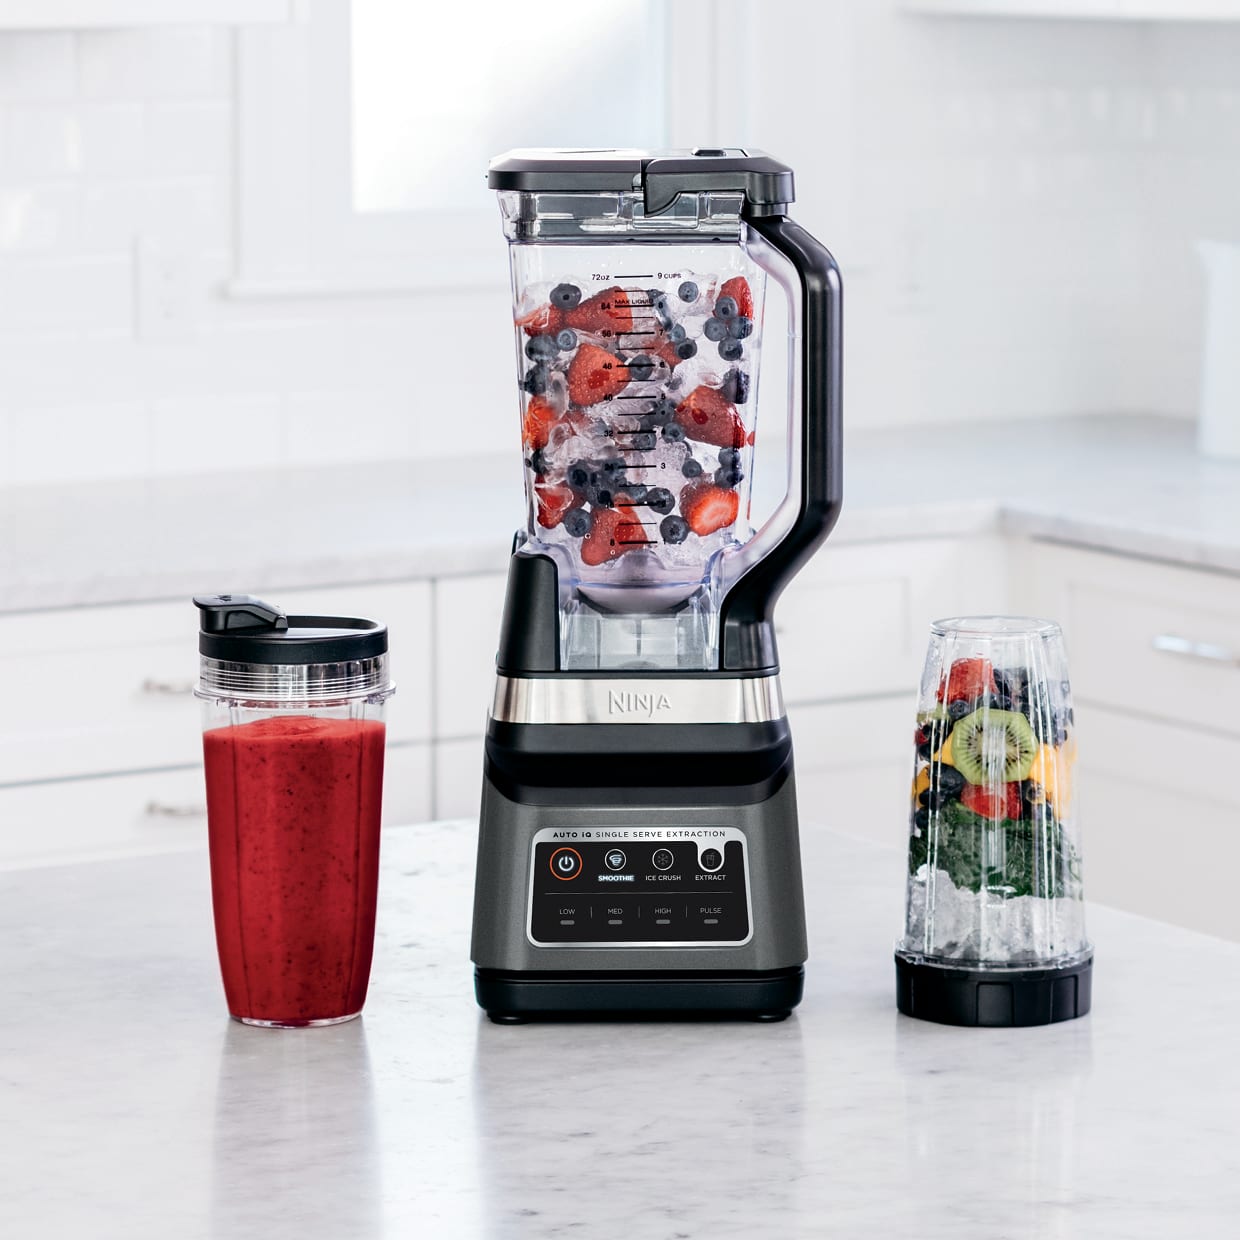 What To Look For In A Blender